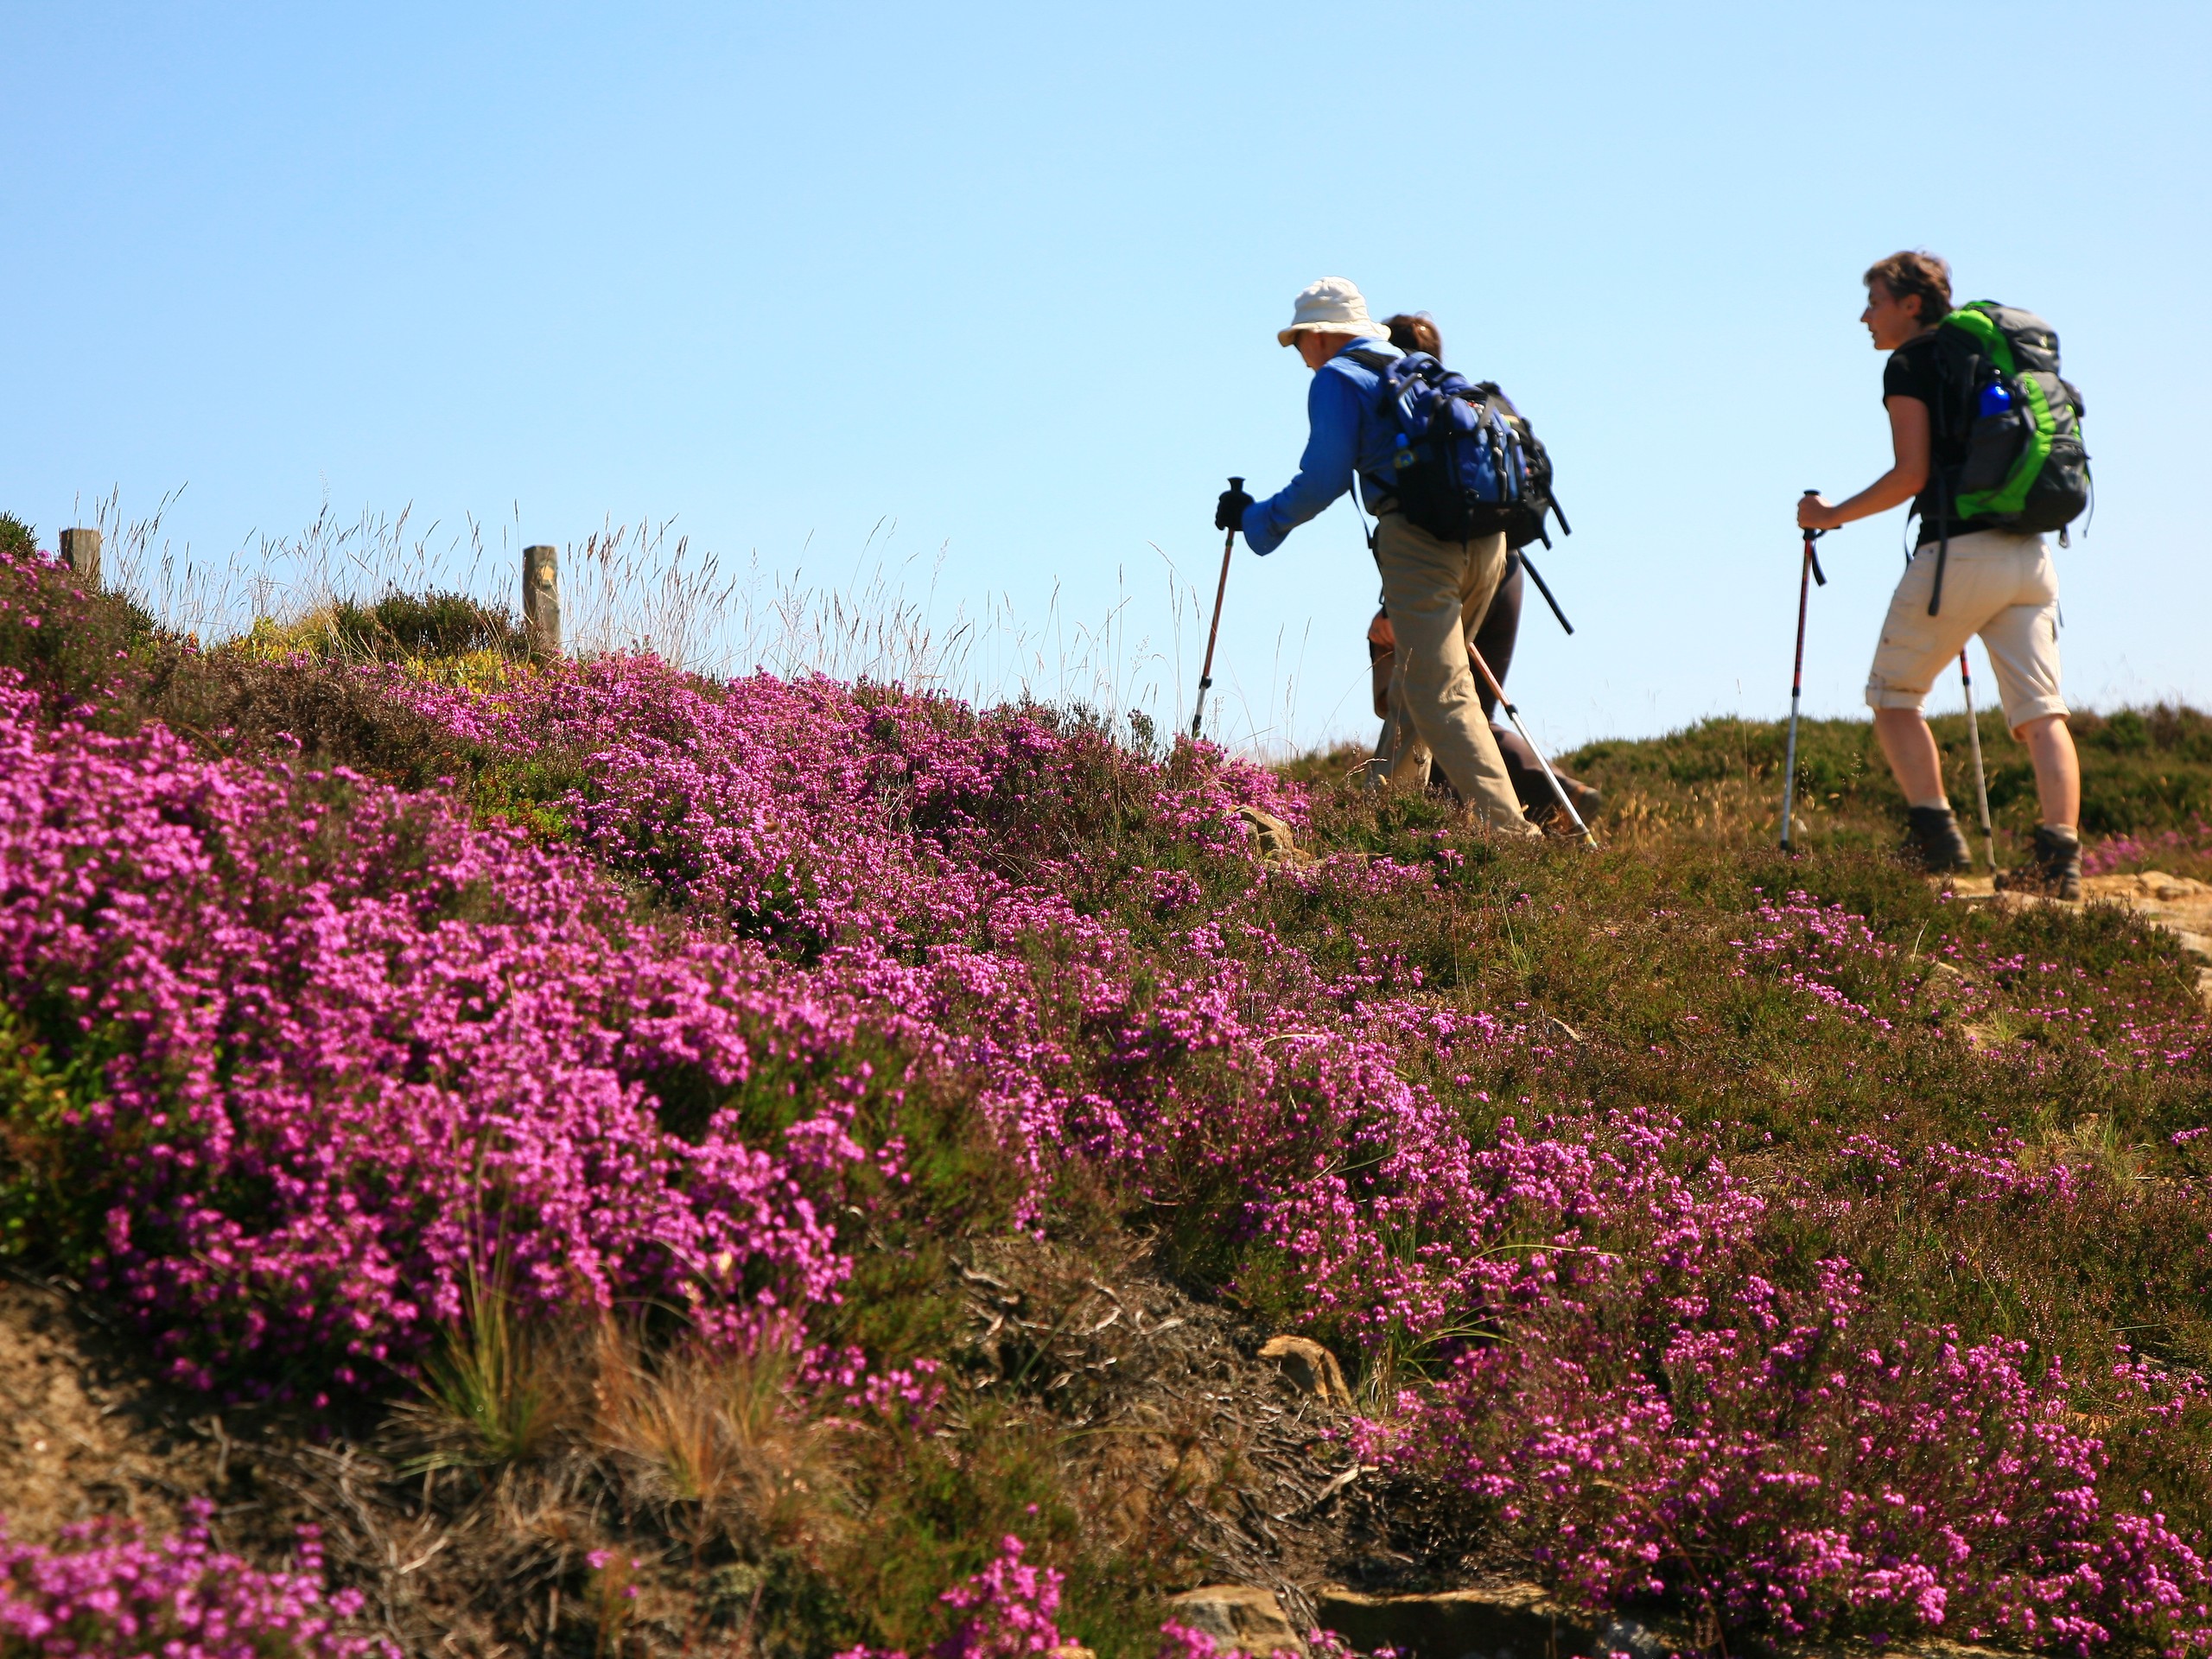 Two hikers and wildflowers in North England (c)John Millen